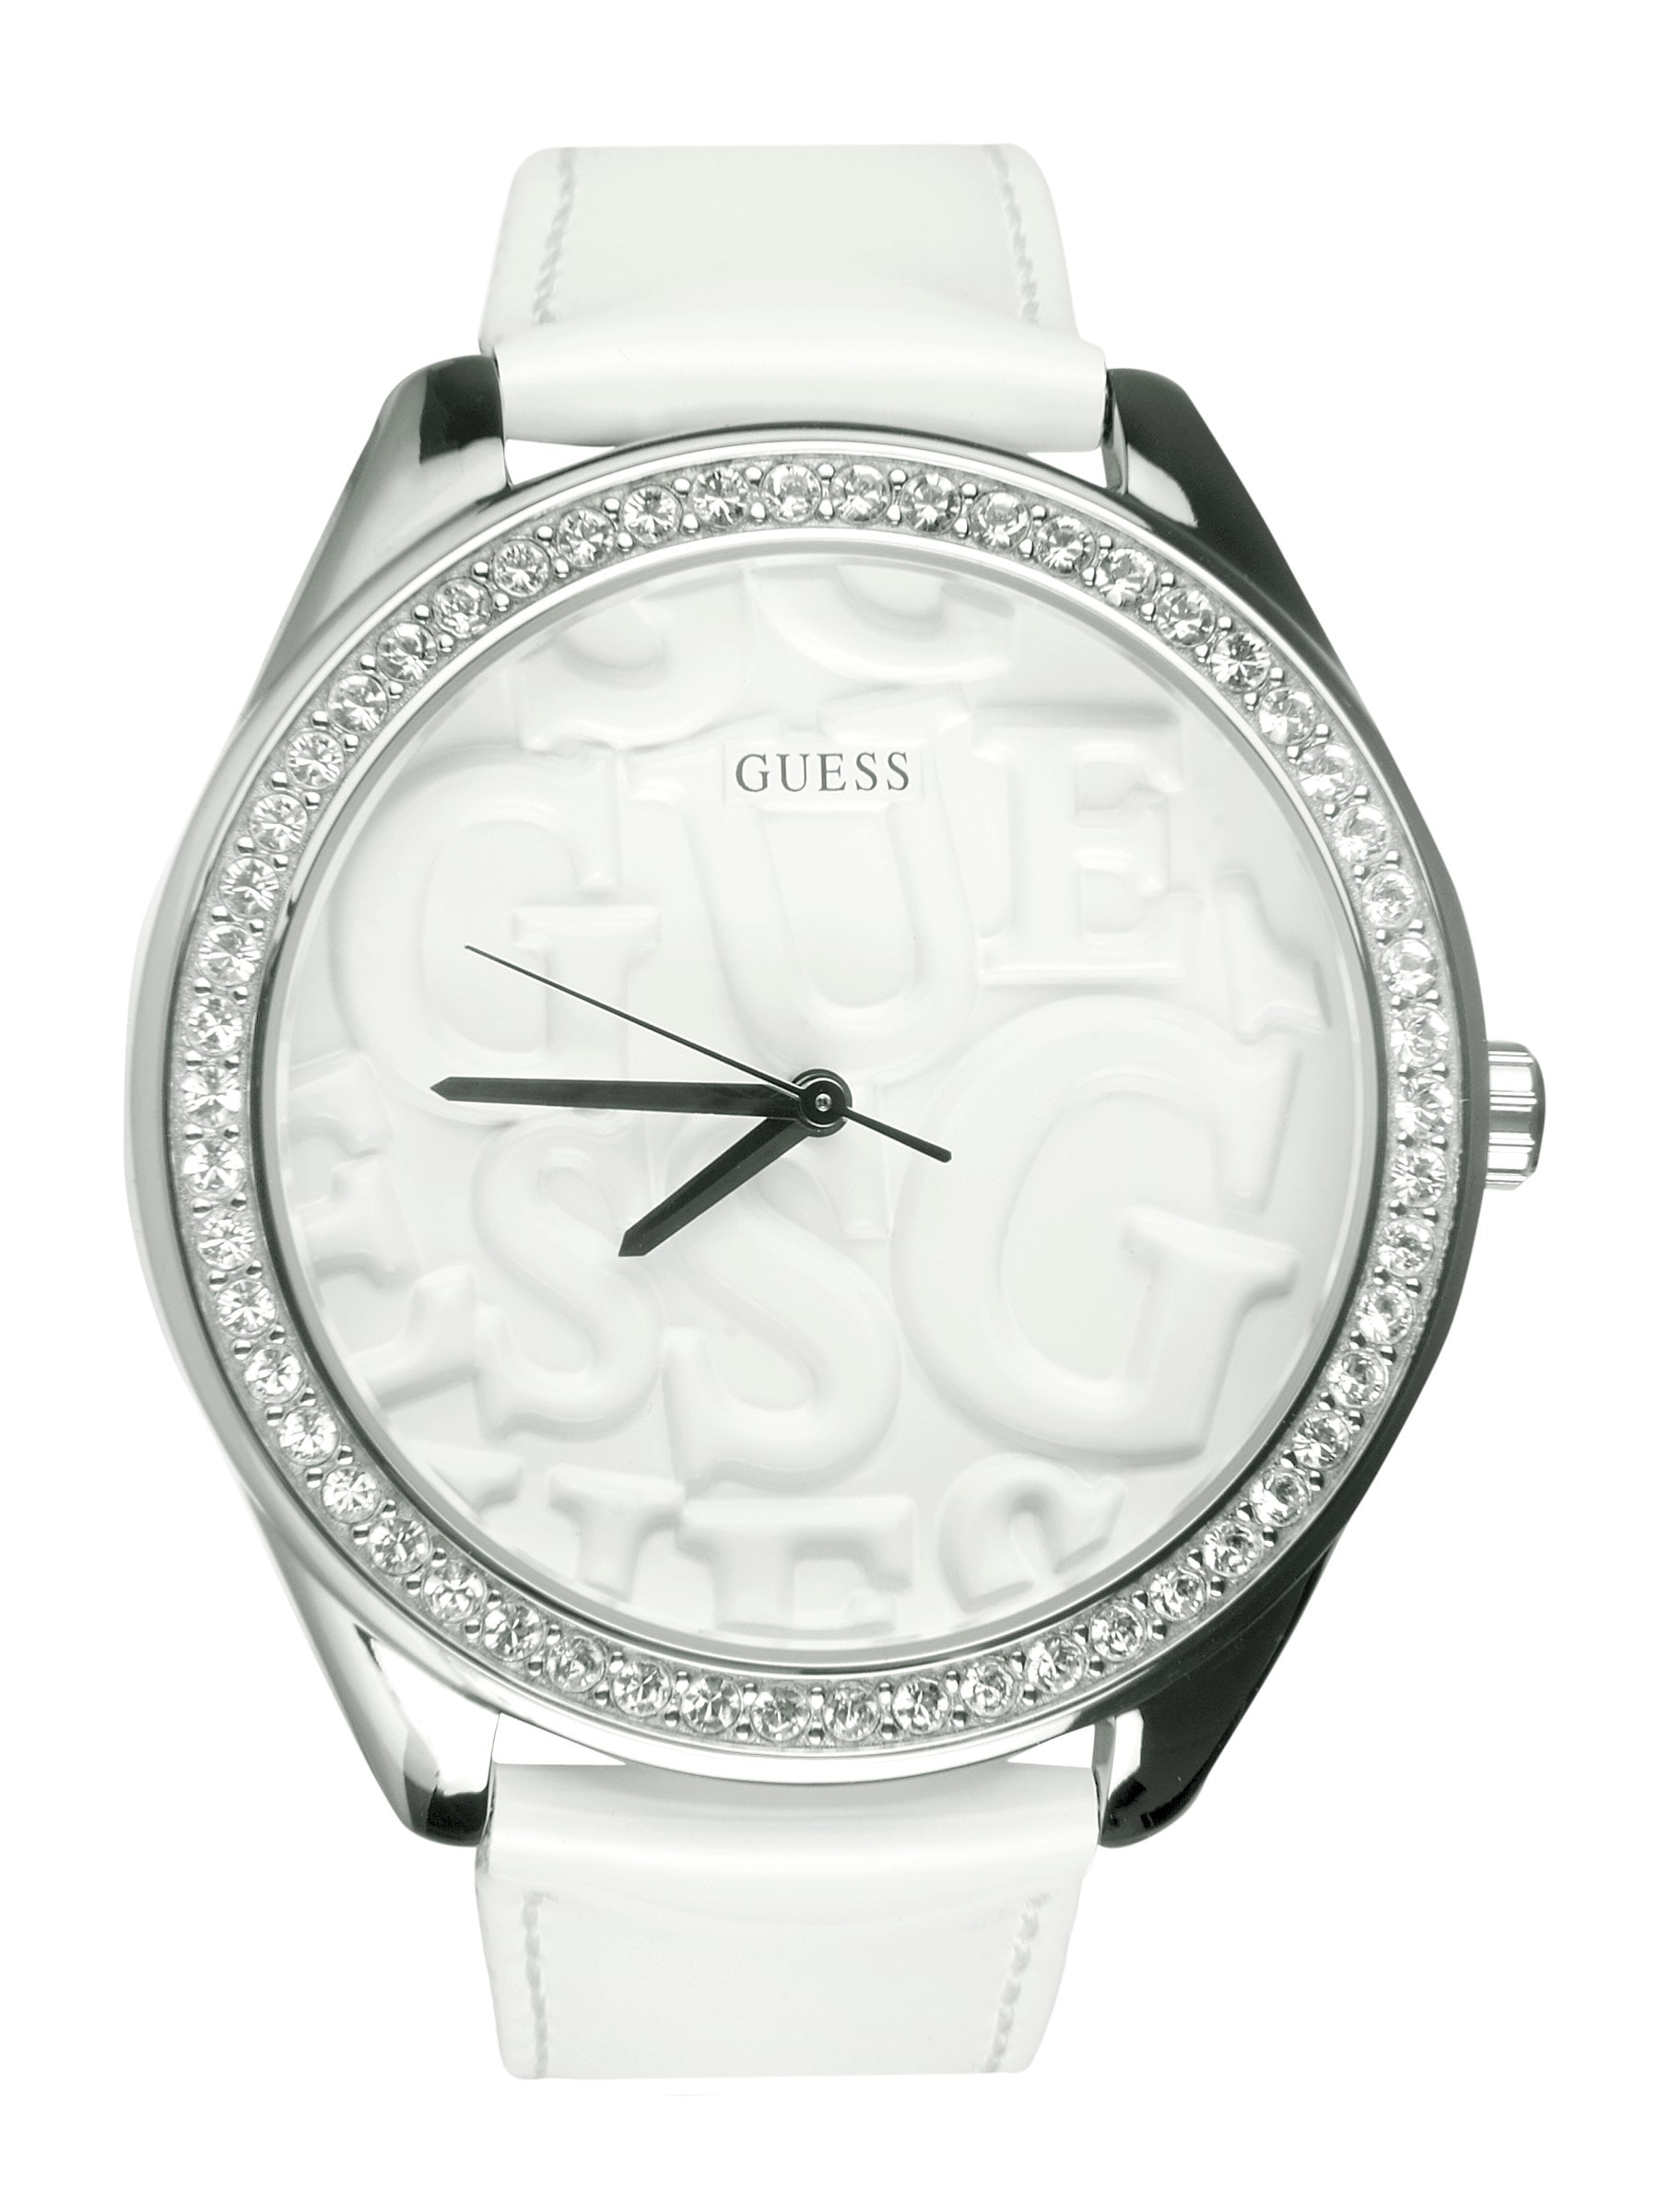 Guess Women Puffy G White Dial Watch with Swarovski Elements W85098L1